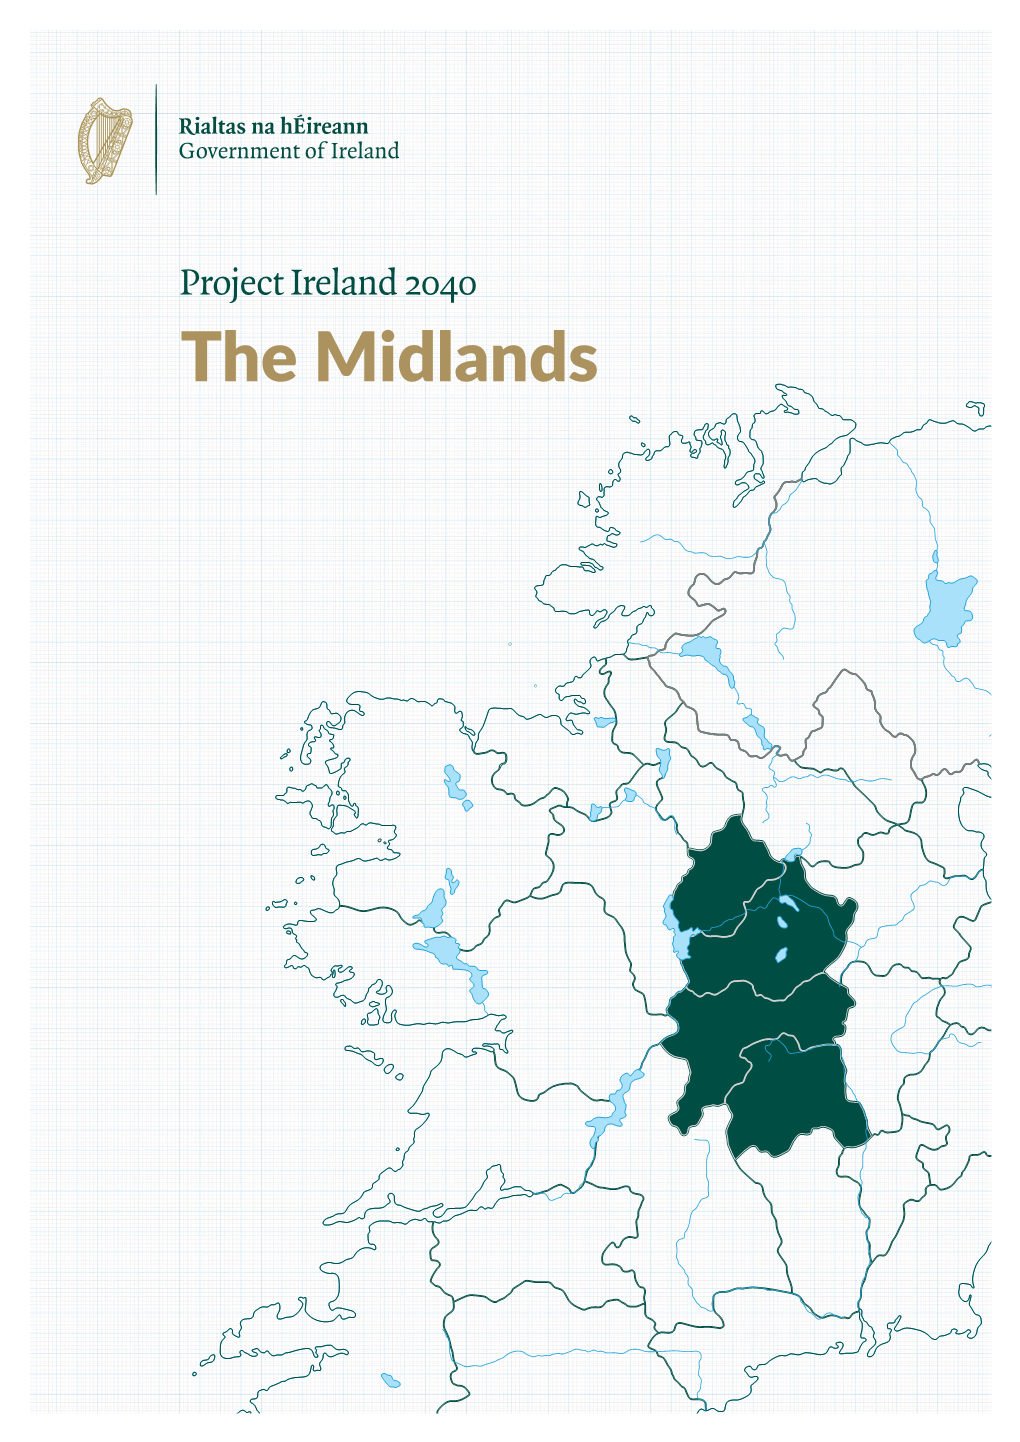 The Midlands Project Ireland 2040 in the Midlands